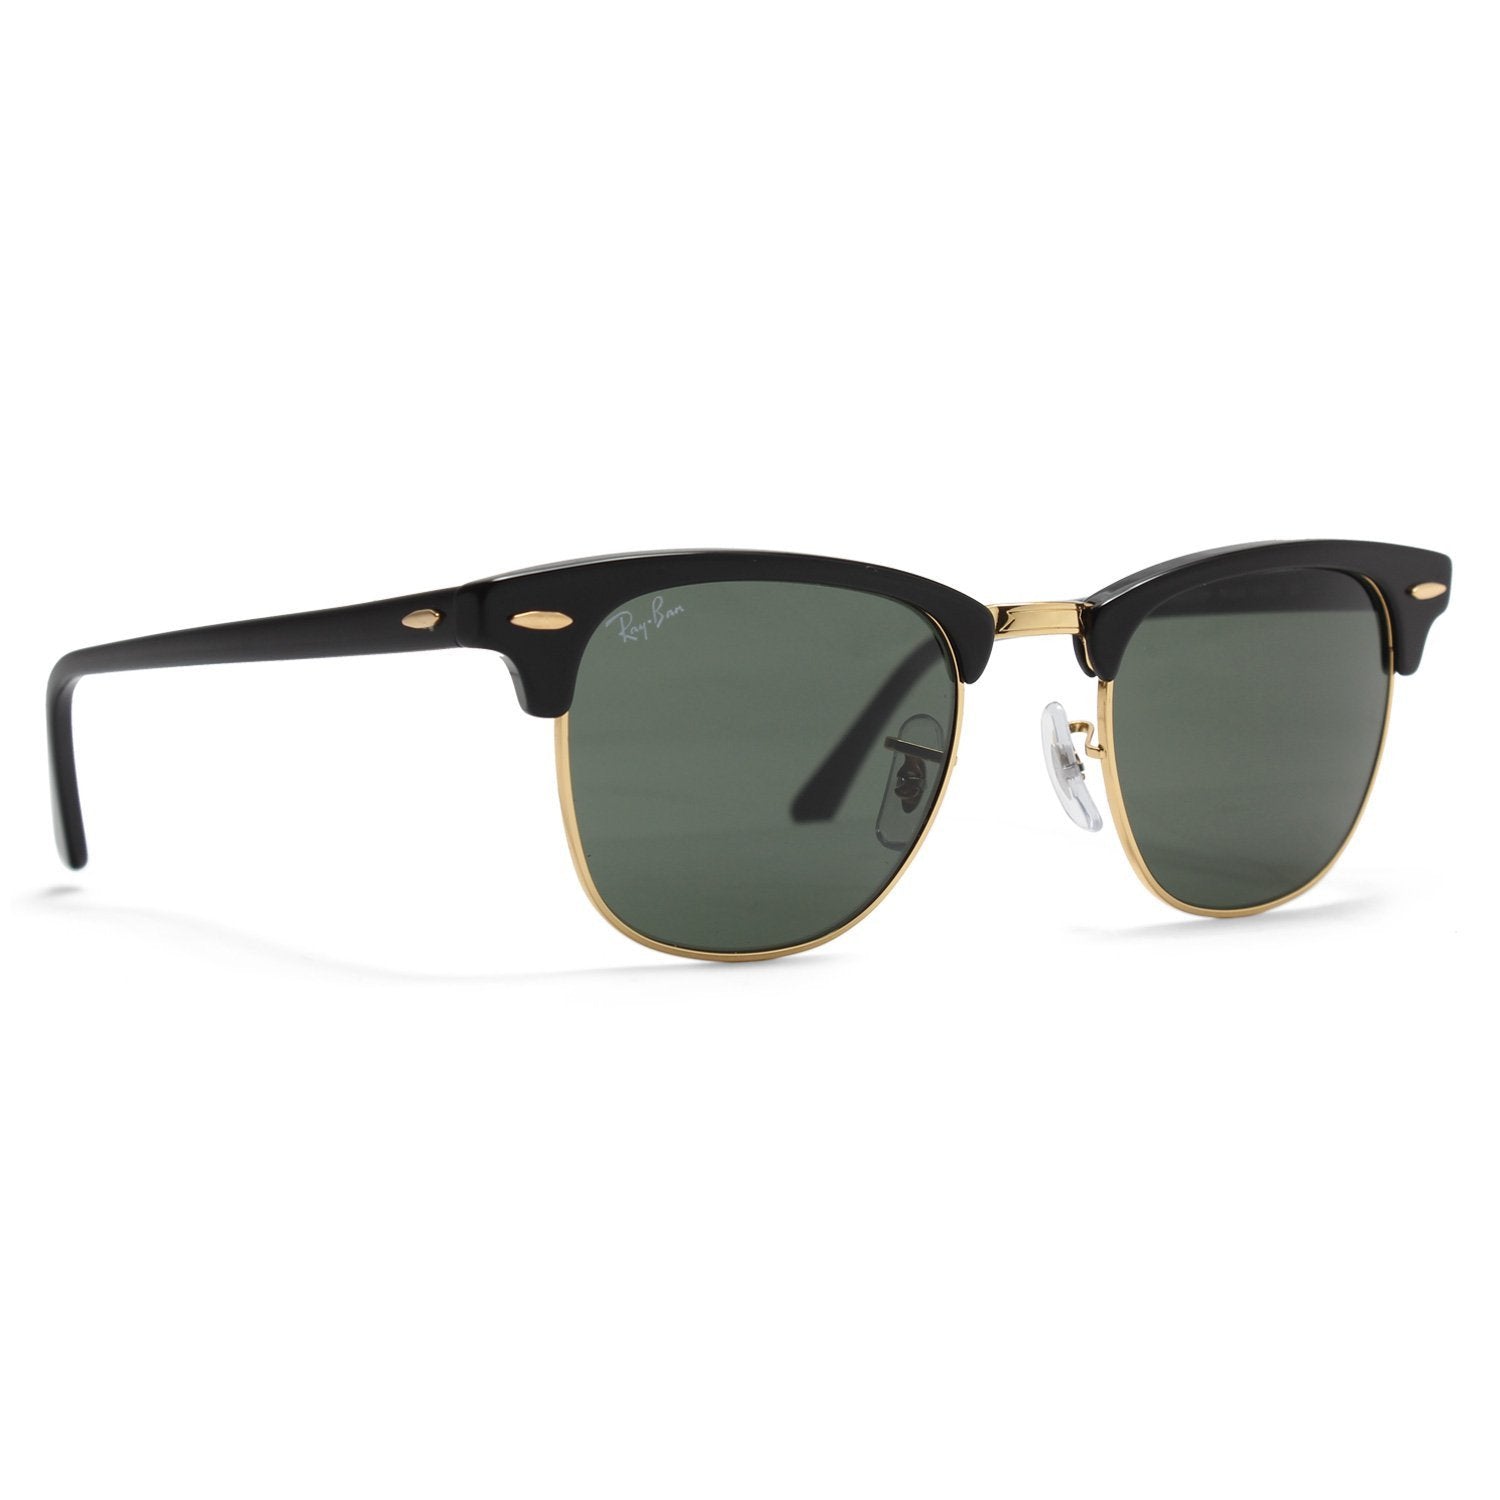 Women's Ray Ban Clubmaster 49mm RB3016 Sunglasses